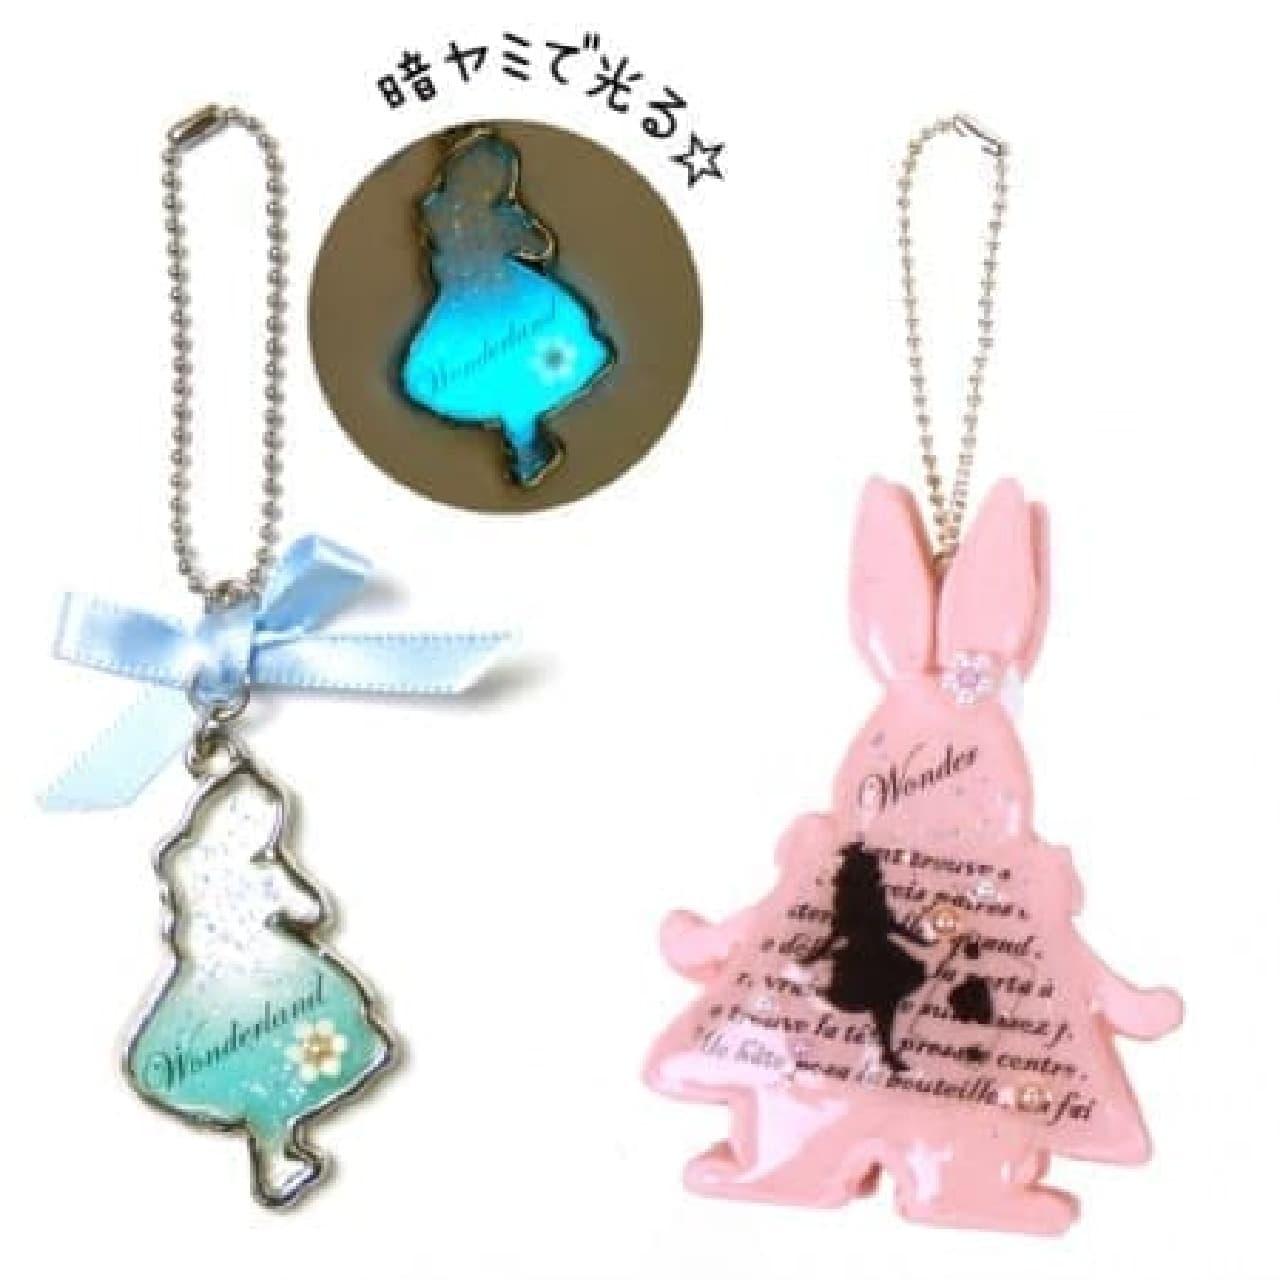 You can make a charm with the theme of "Alice in Wonderland"